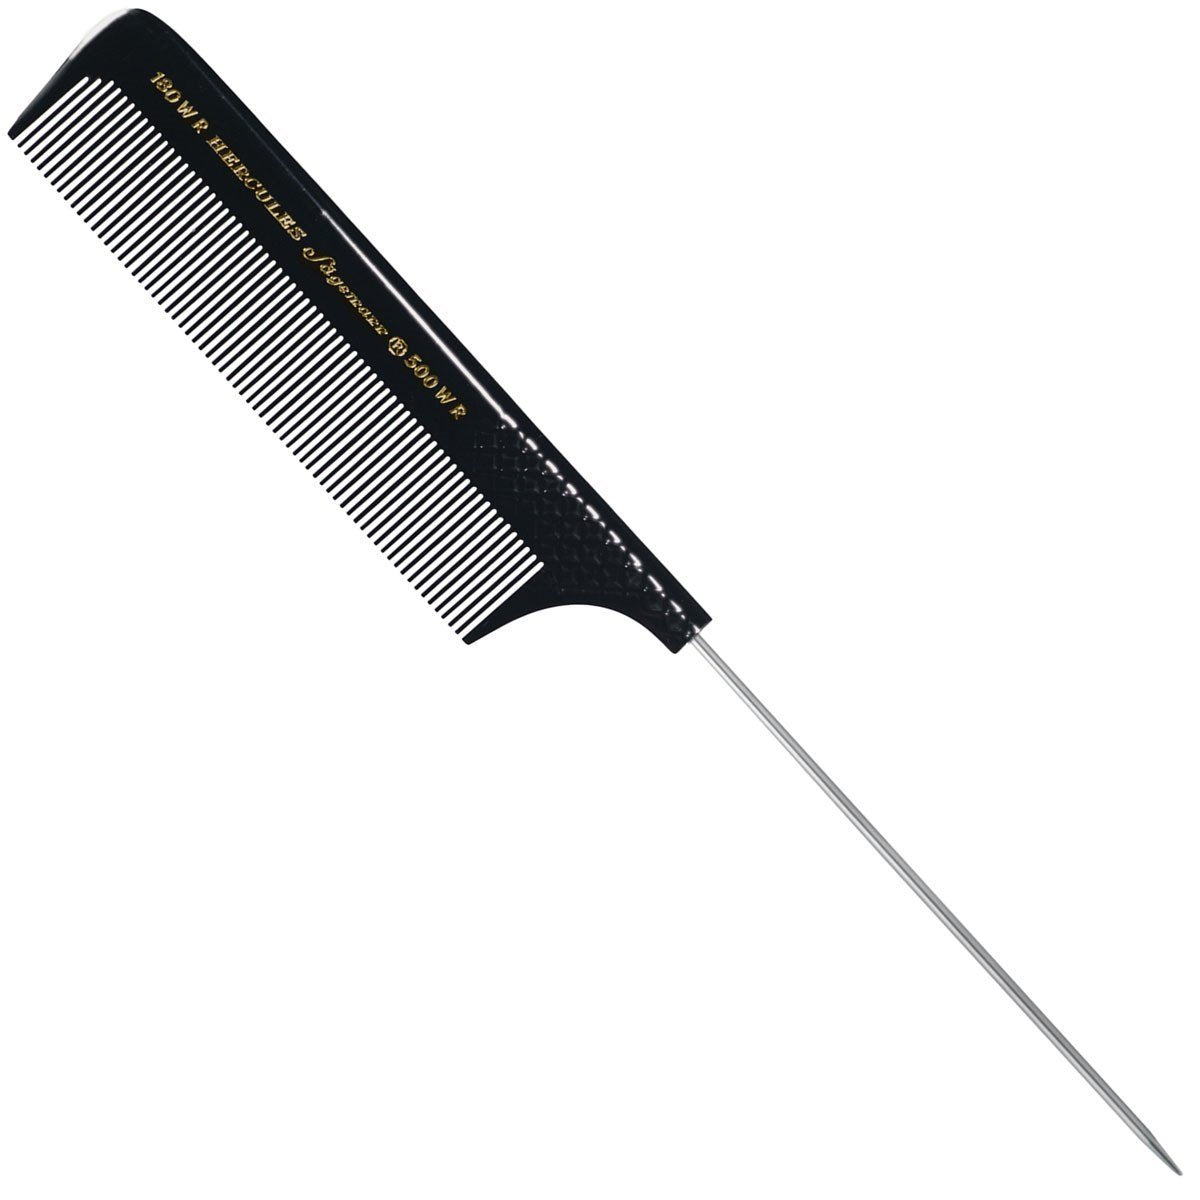 HERCULES Premium Hard Rubber Pin Tail Comb 9 Inch Stainless Steel